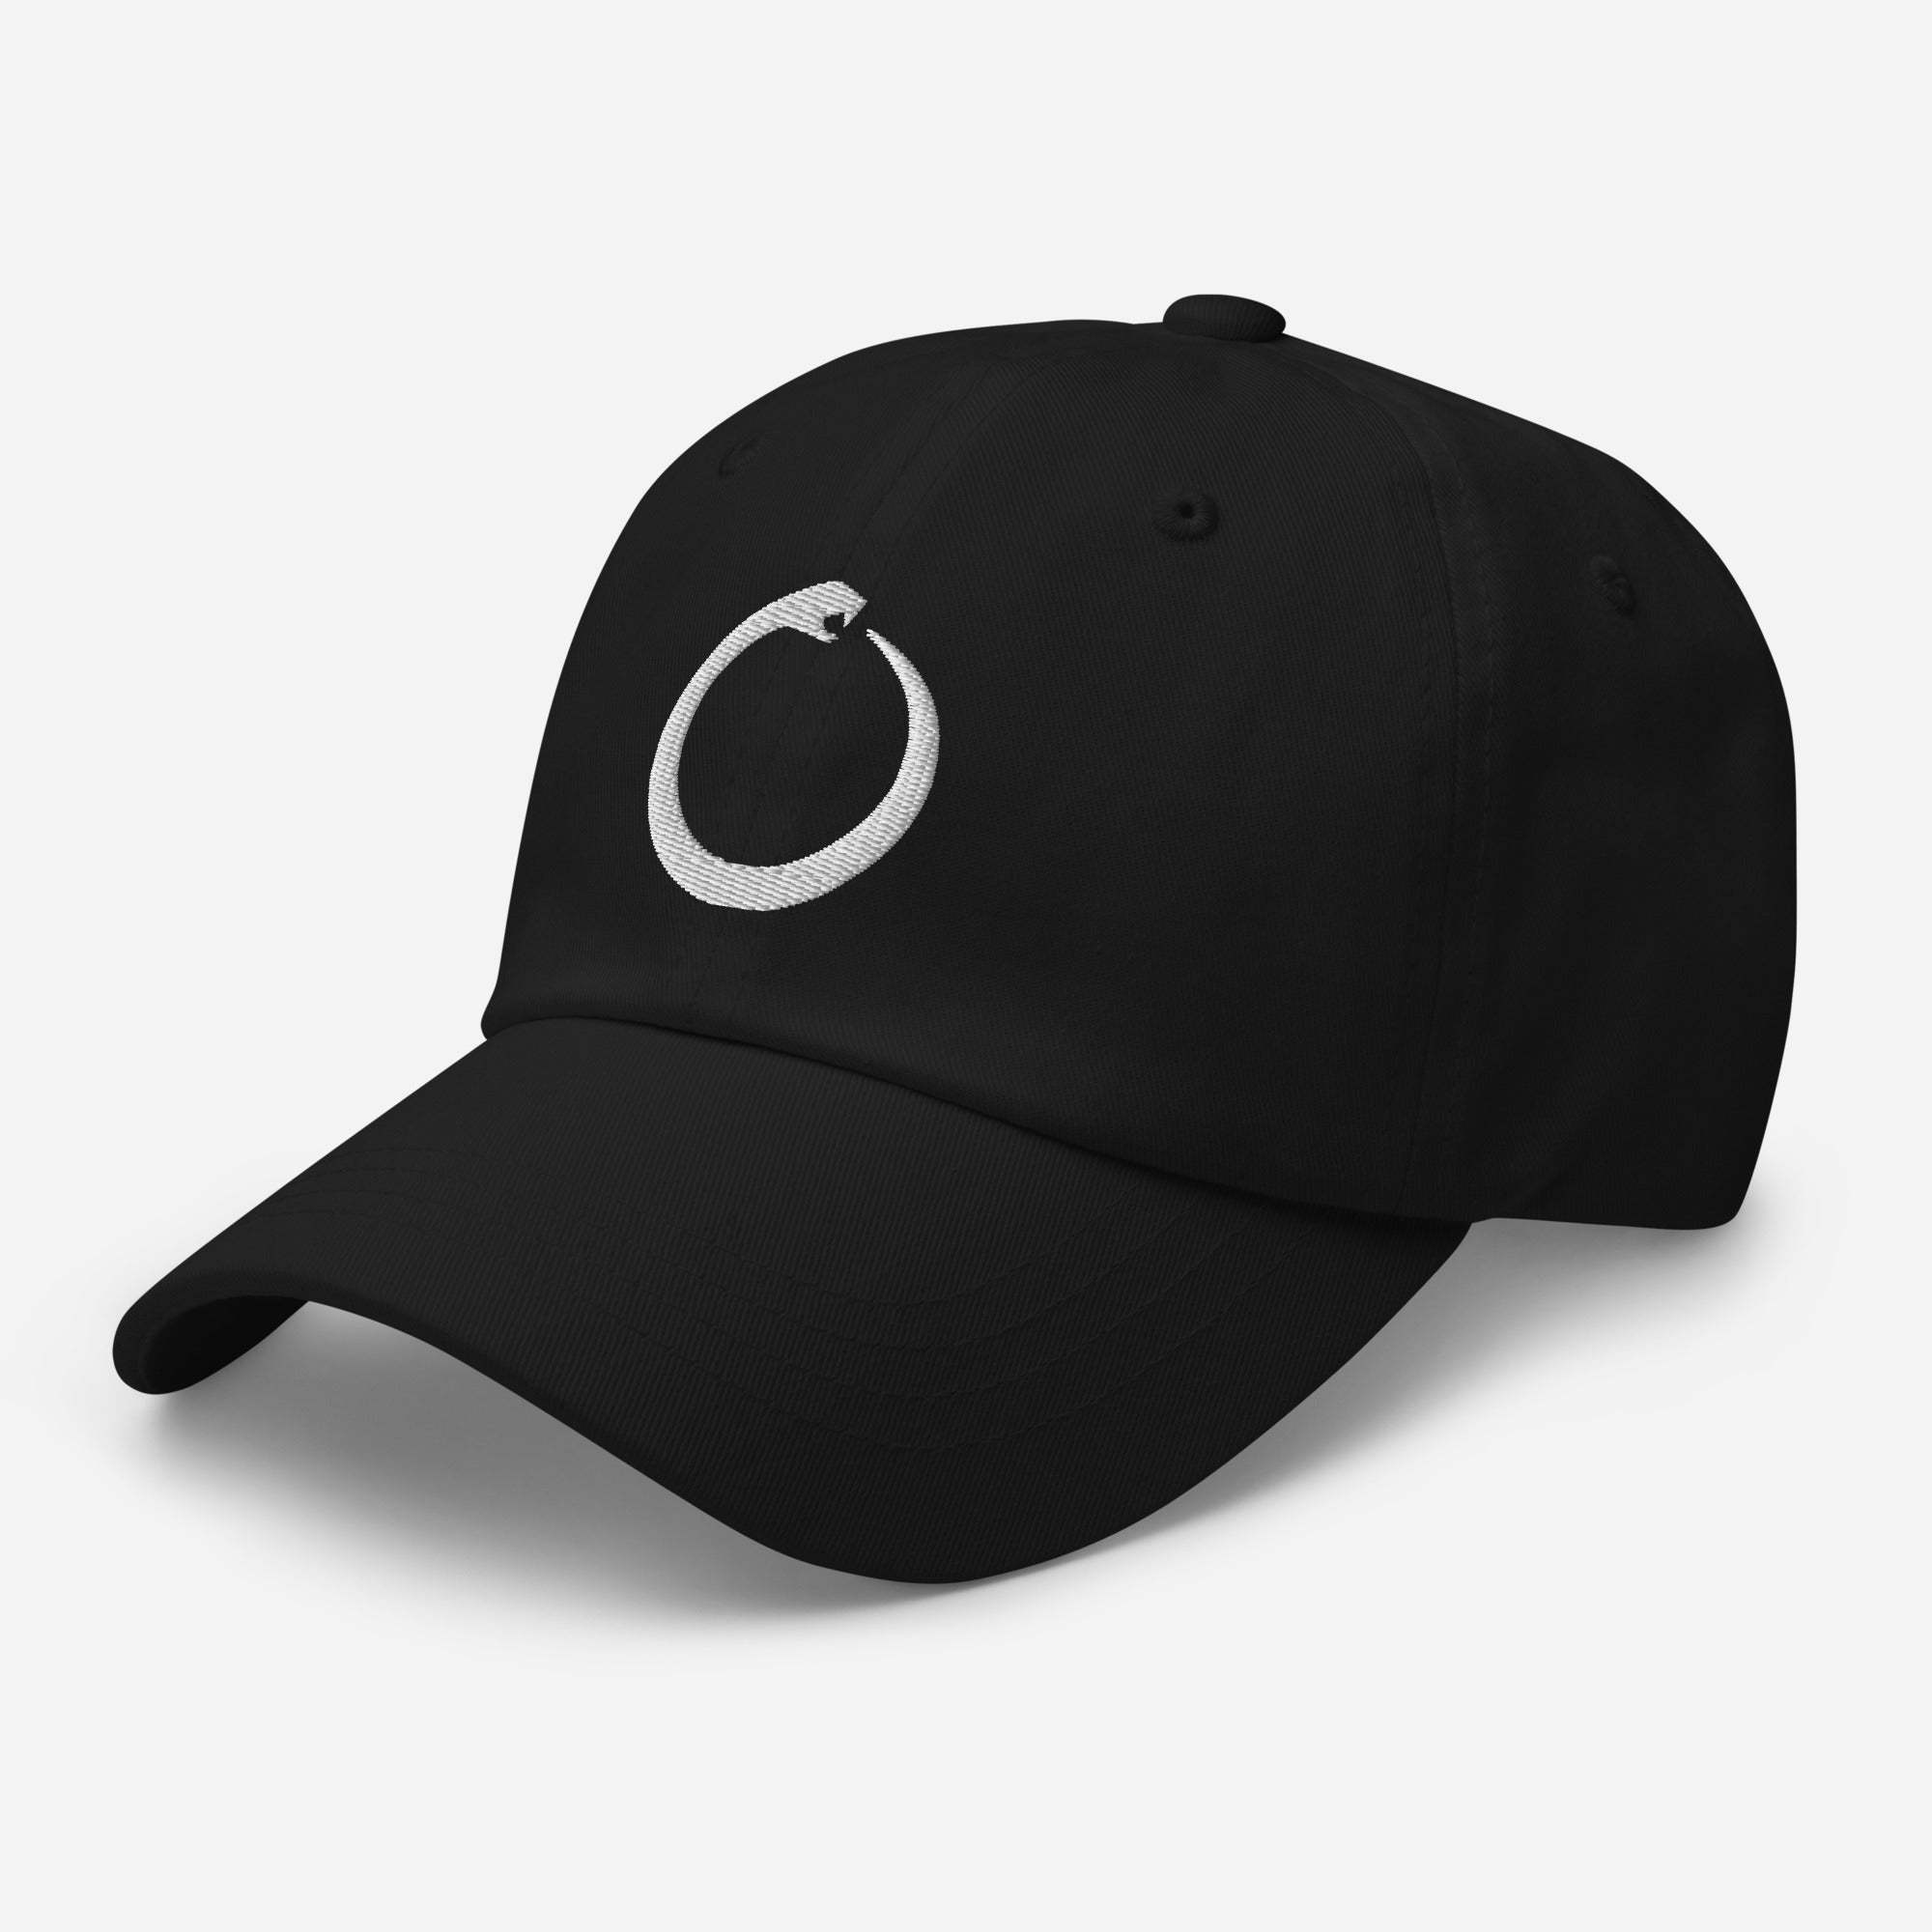 Ouroboros Snake Eating Tail Alchemy Symbol Embroidered Baseball Cap Dad hat